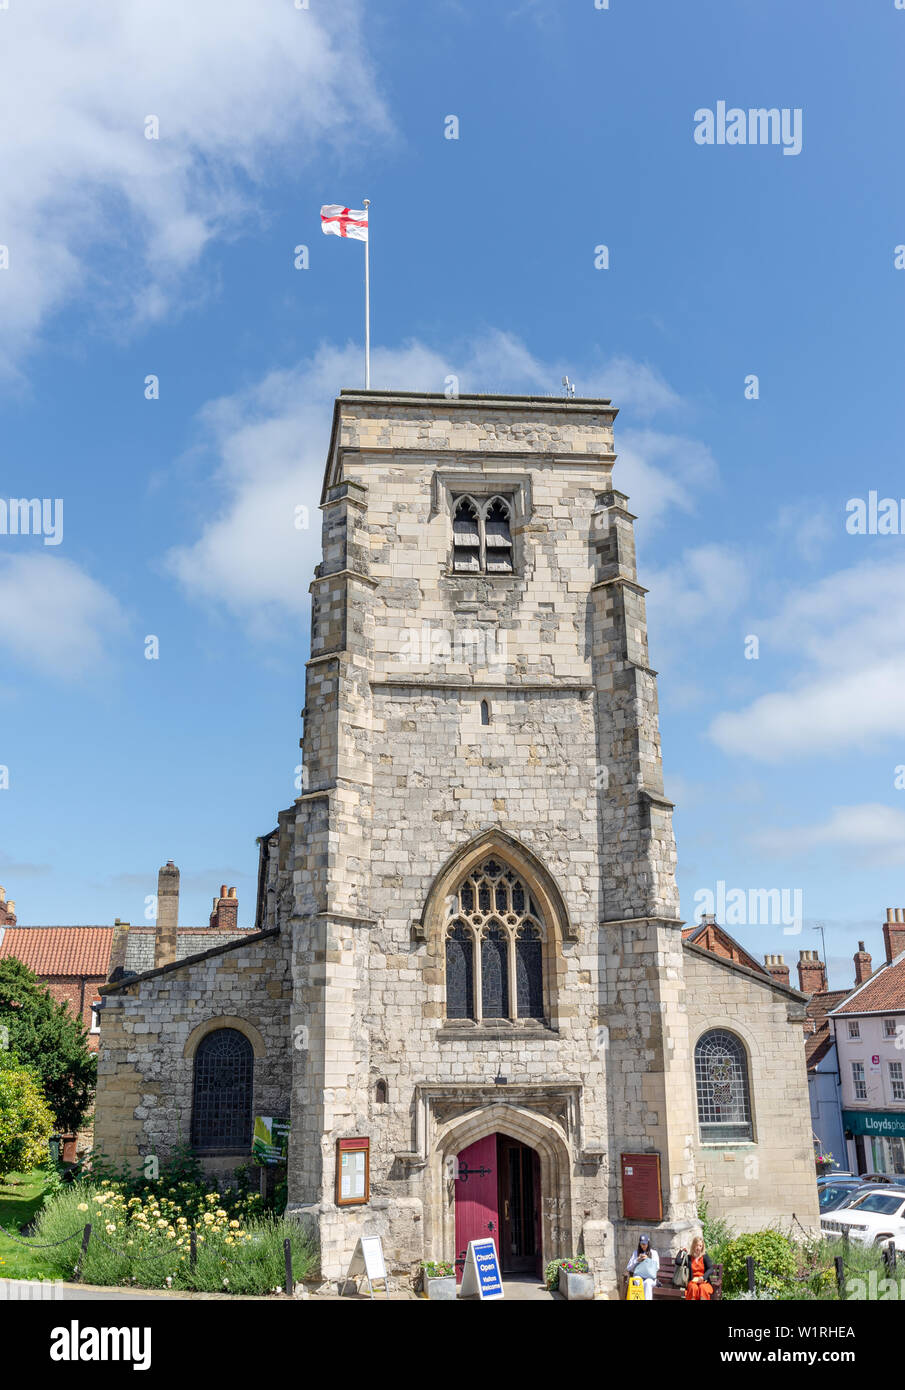 St Michael’s Church, Malton.  The church has buildings to the side and rear and a flag flies from the tower.  A blue sky is above. Stock Photo